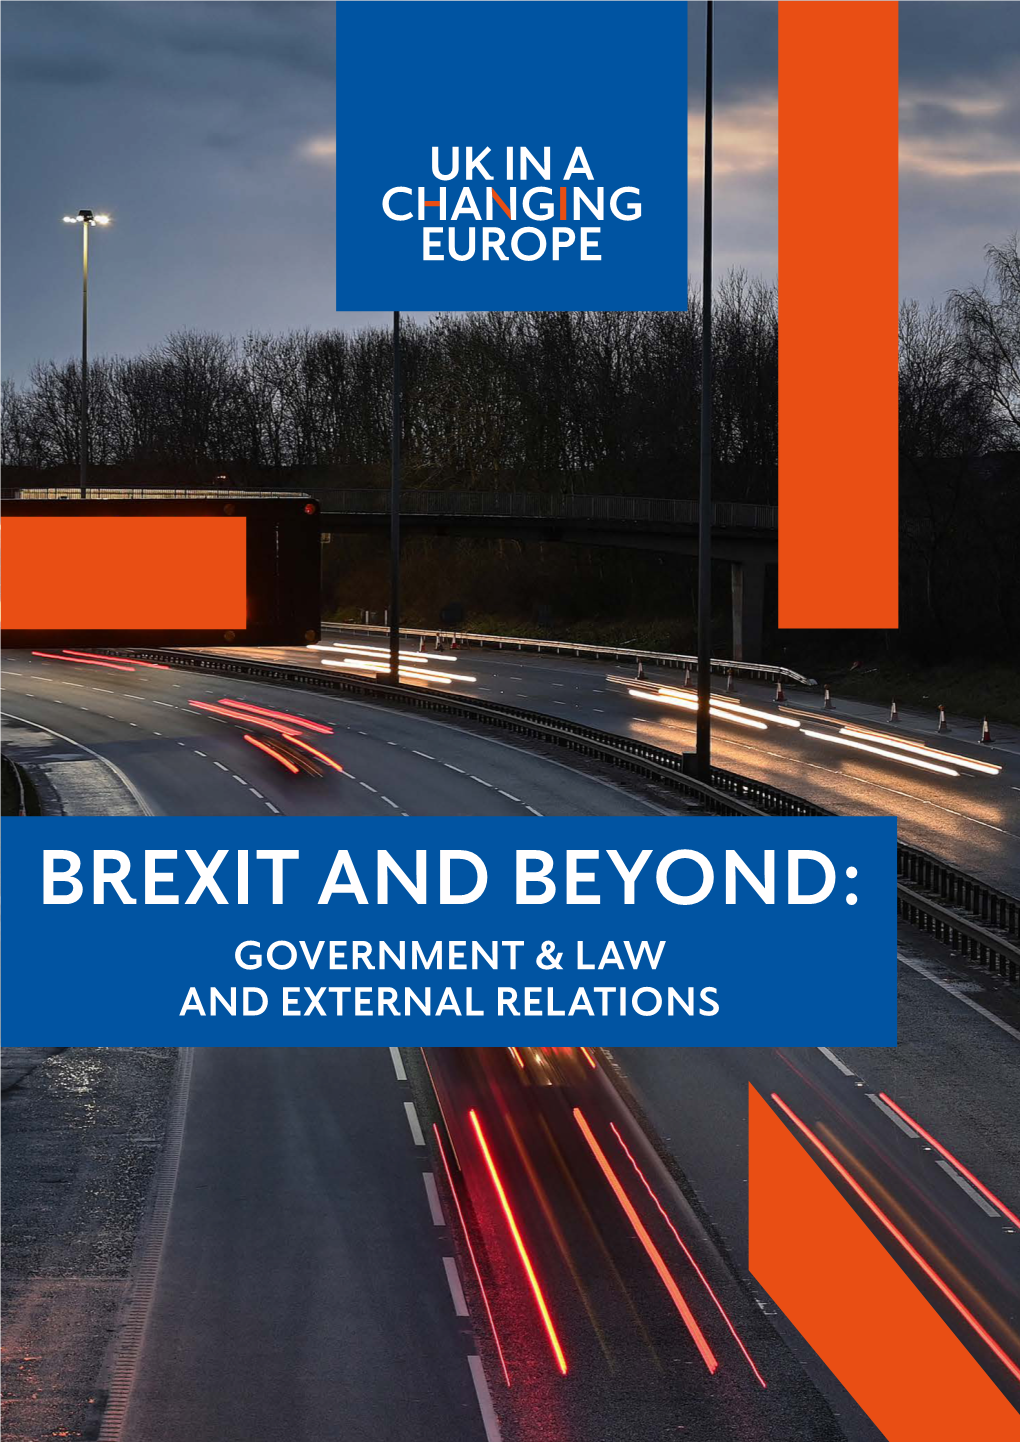 BREXIT and BEYOND: Government & Law and EXTERNAL RELATIONS